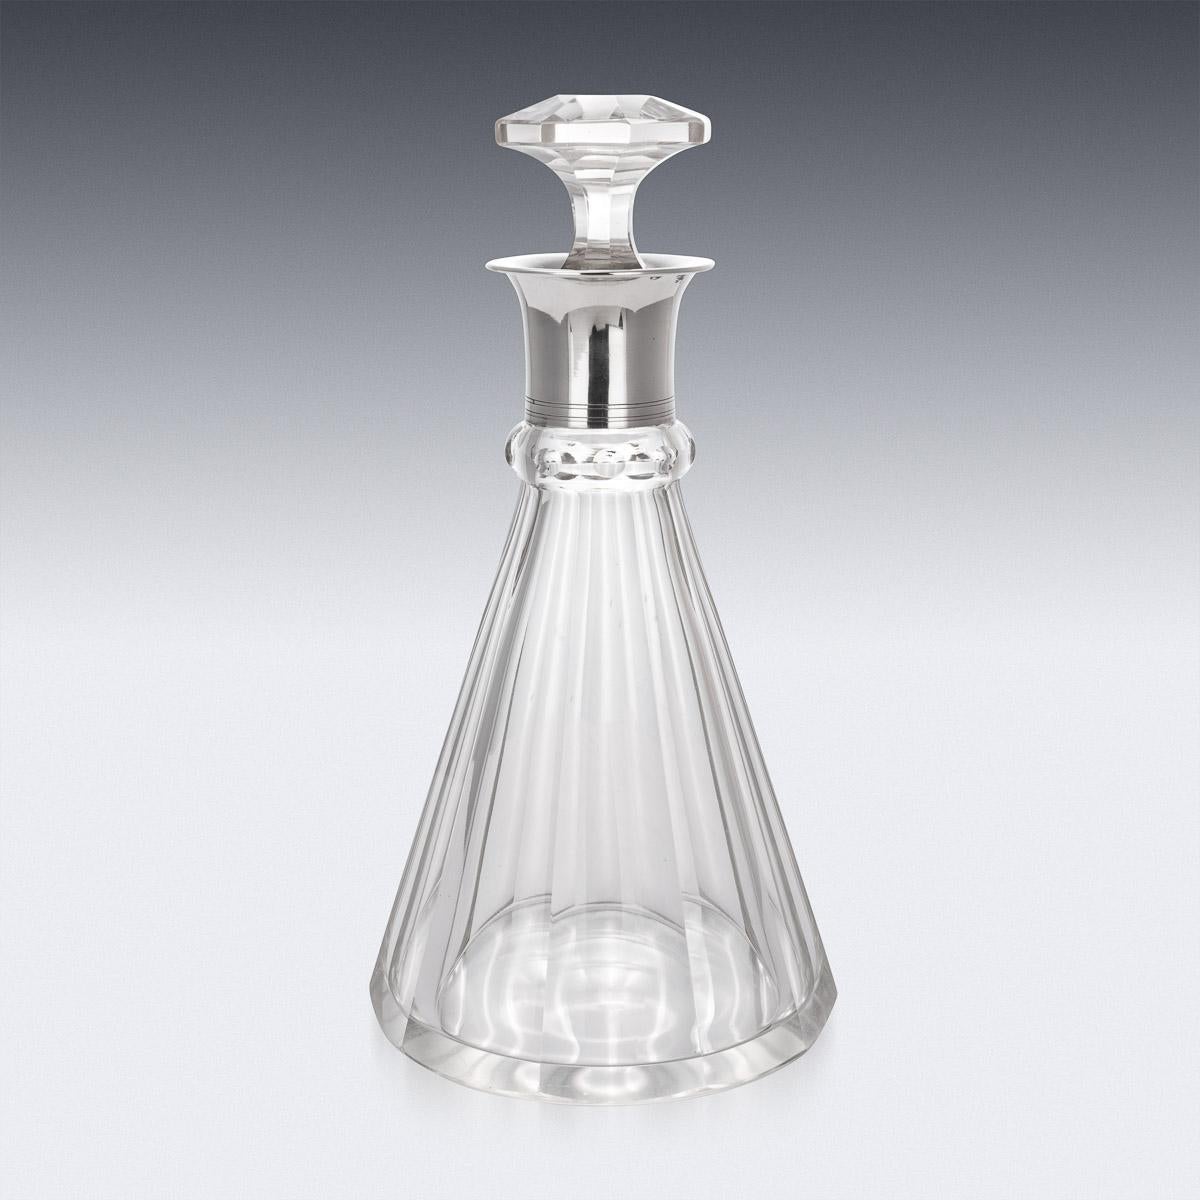 Antique early 20th century German Art Deco solid silver and glass large decanter. Of particularly large size with straight cut crystal glass body and mounted with elegant octagonal stopper. Applied with a stylized silver collar. This large decanter